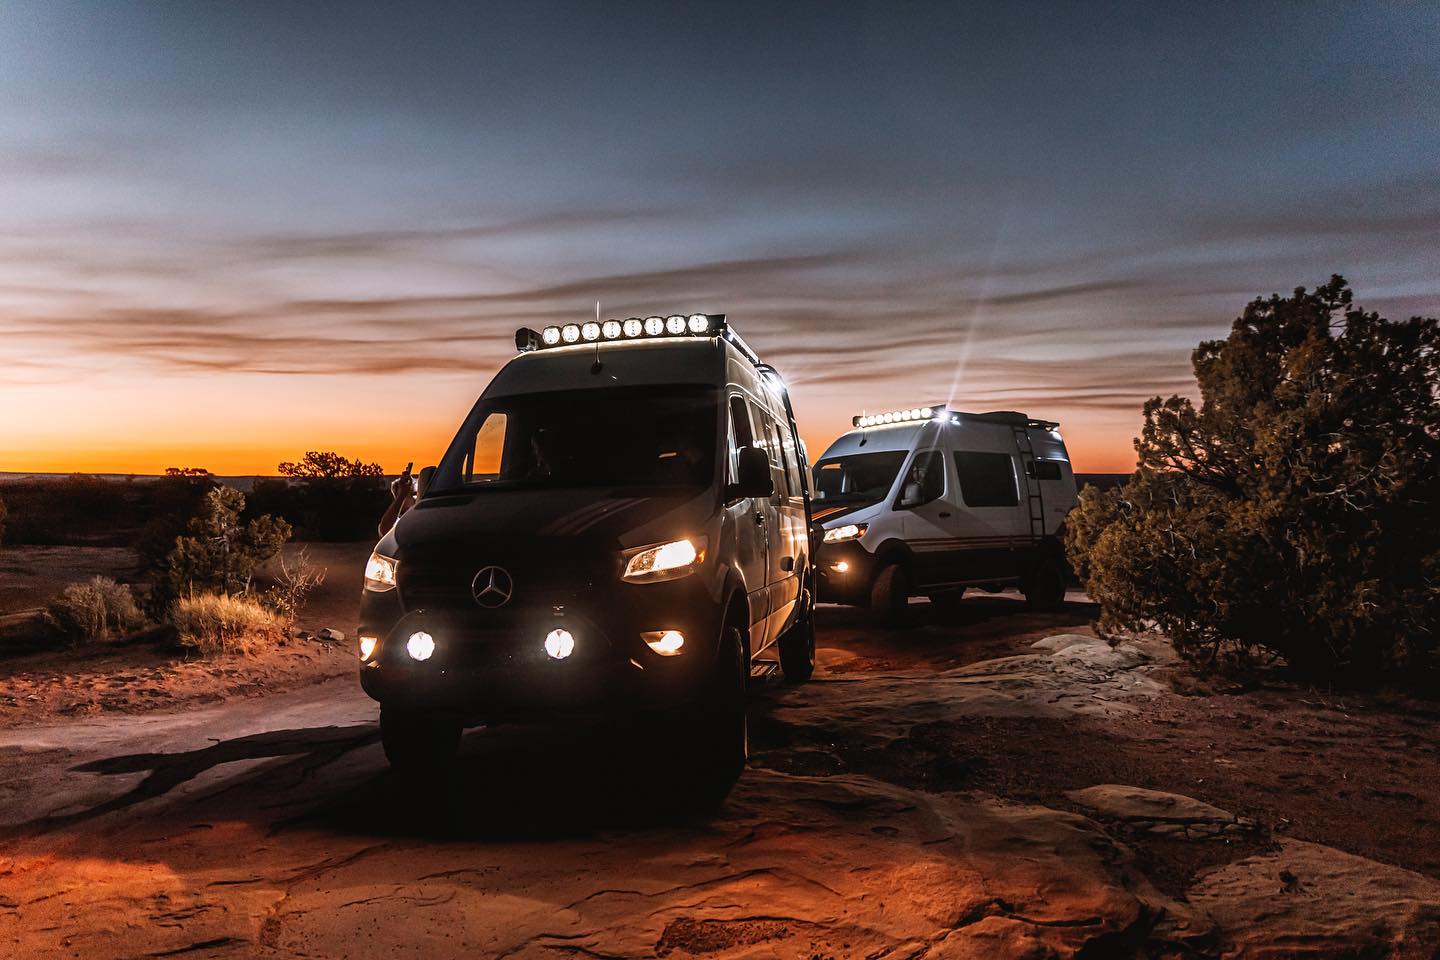 Two Best Mode 4x4 campervans drive through the night across the desert